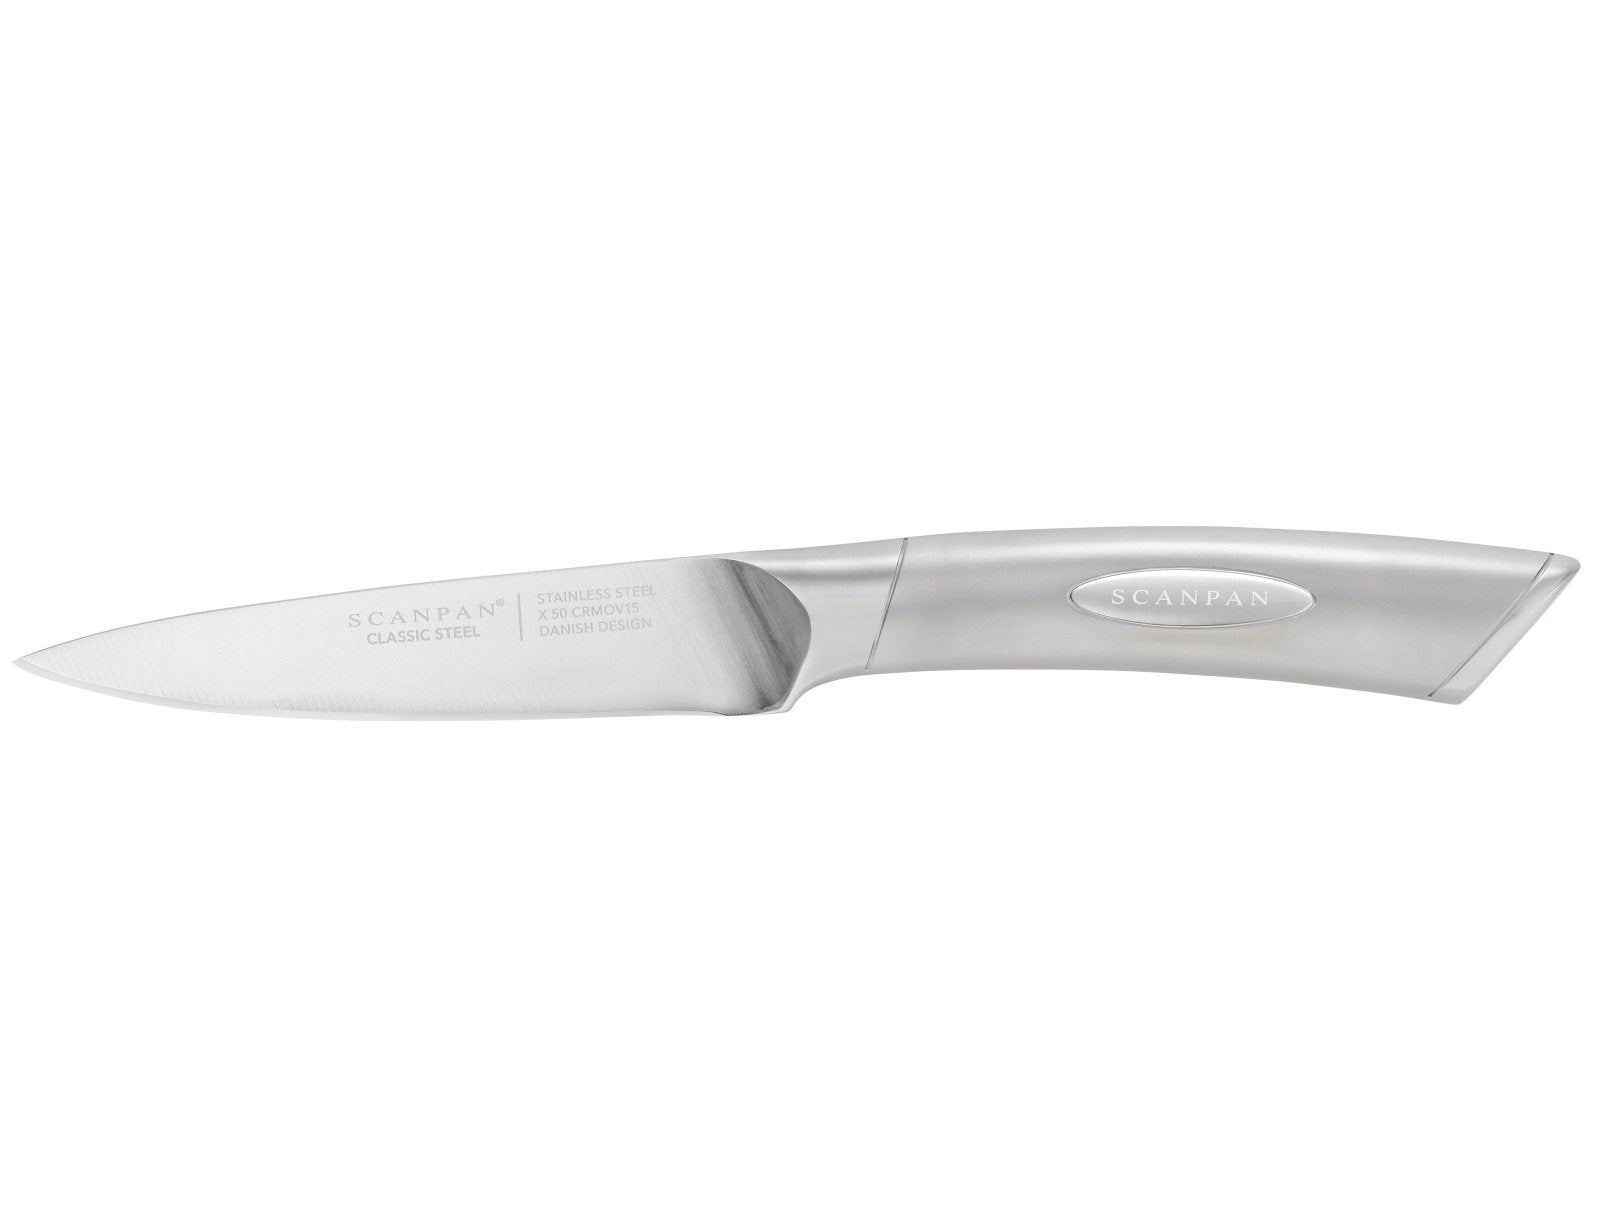 Scanpan Classic Steel 9cm Paring Knife - SP9001100900 - The Cotswold Knife Company